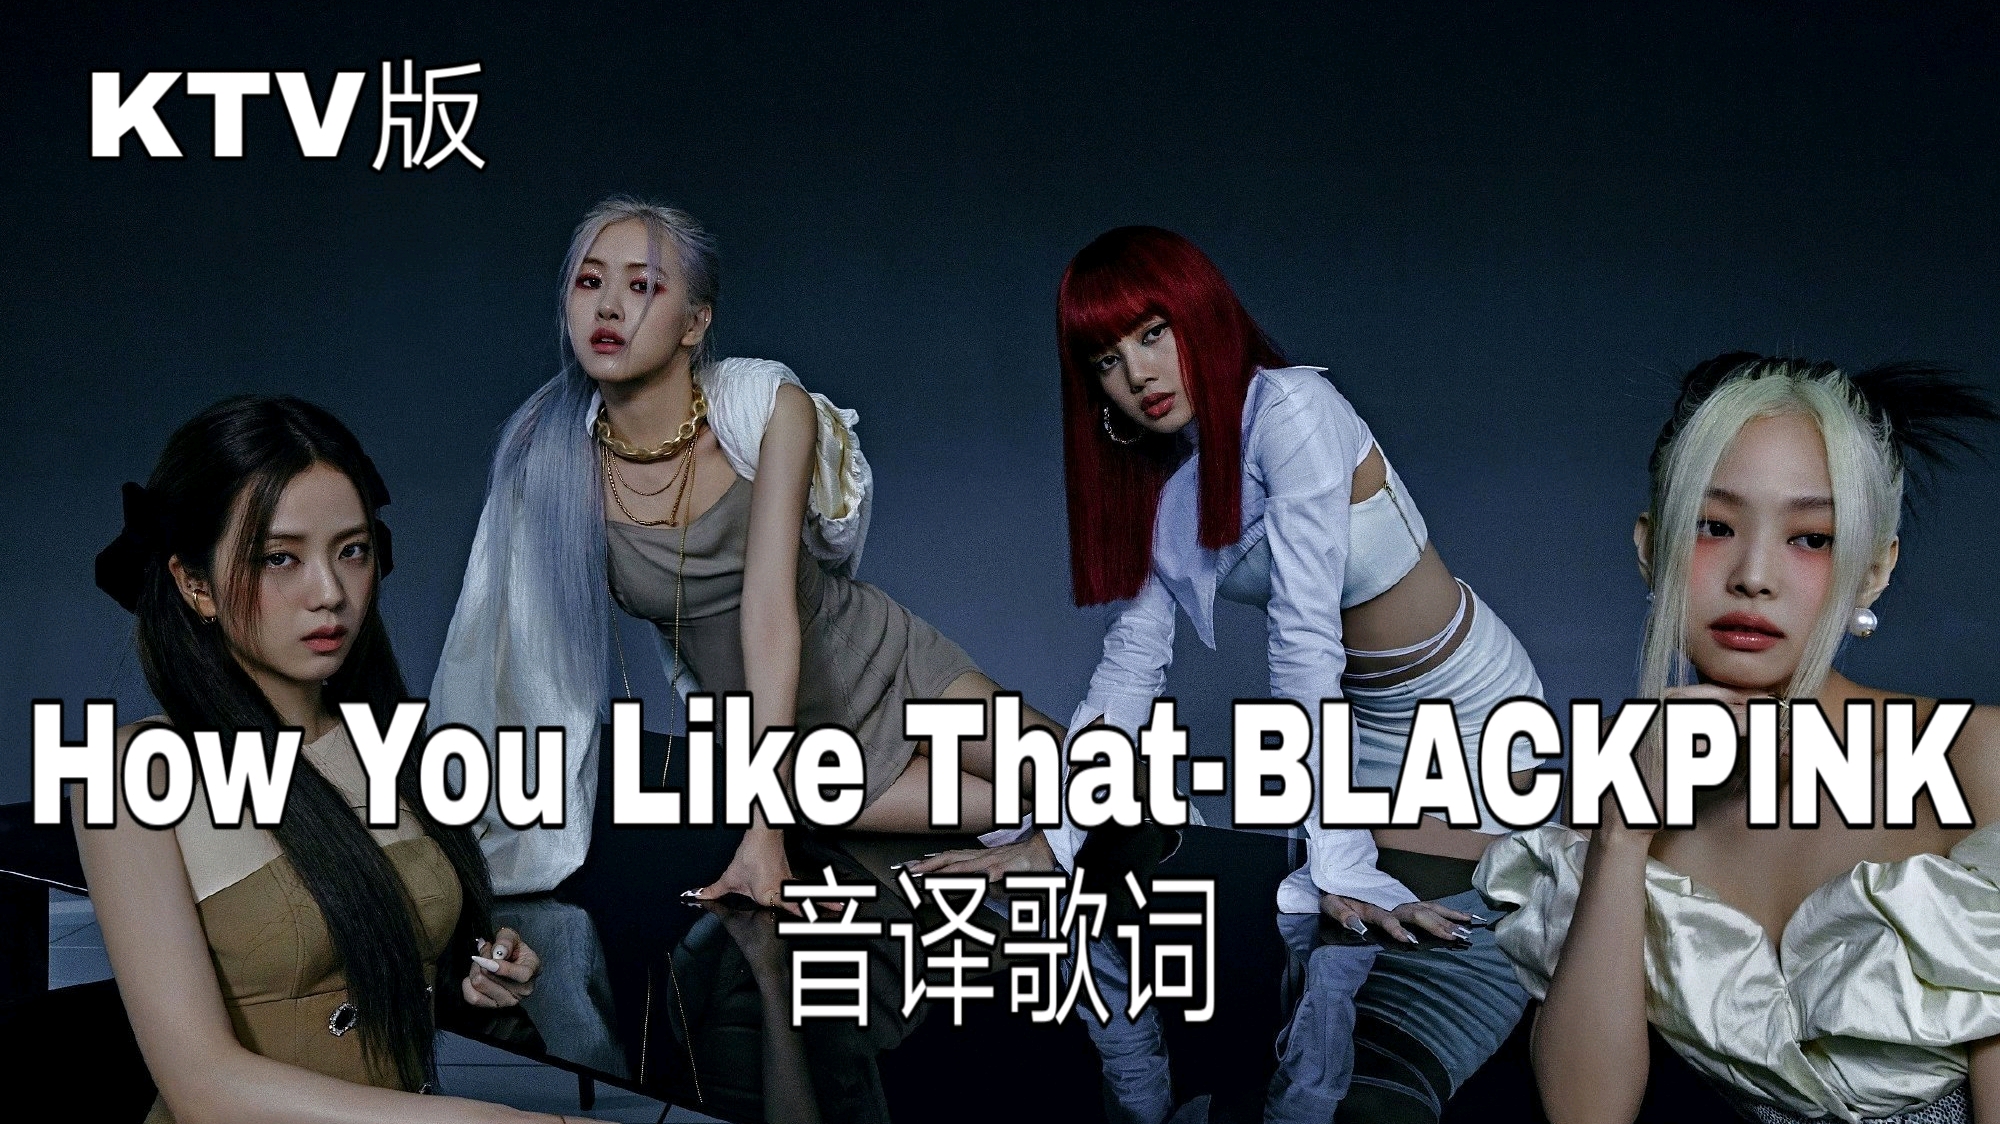 Like that 歌词 how you BlackPink《How You